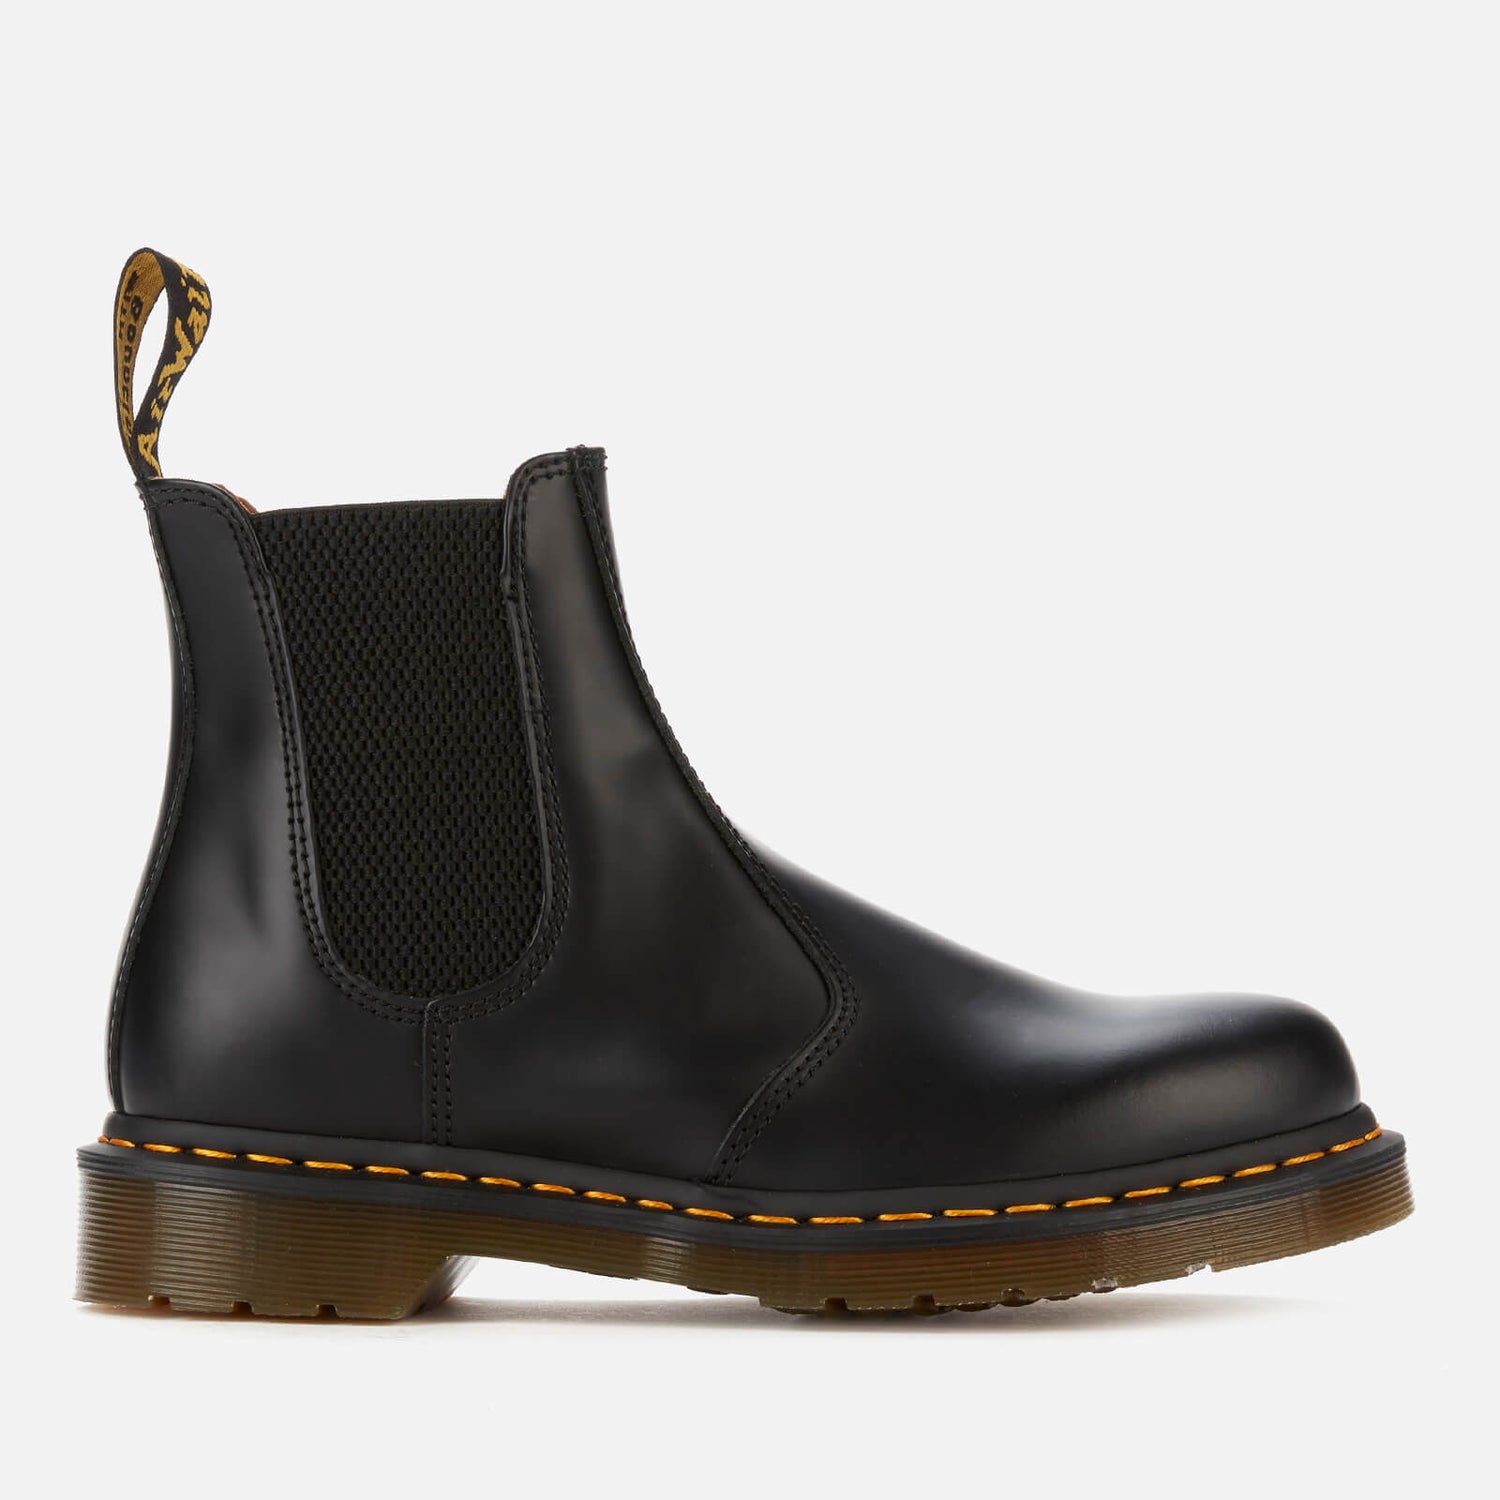 Dr. Martens 2976 Smooth Leather Chelsea Boots - Black | TheHut.com